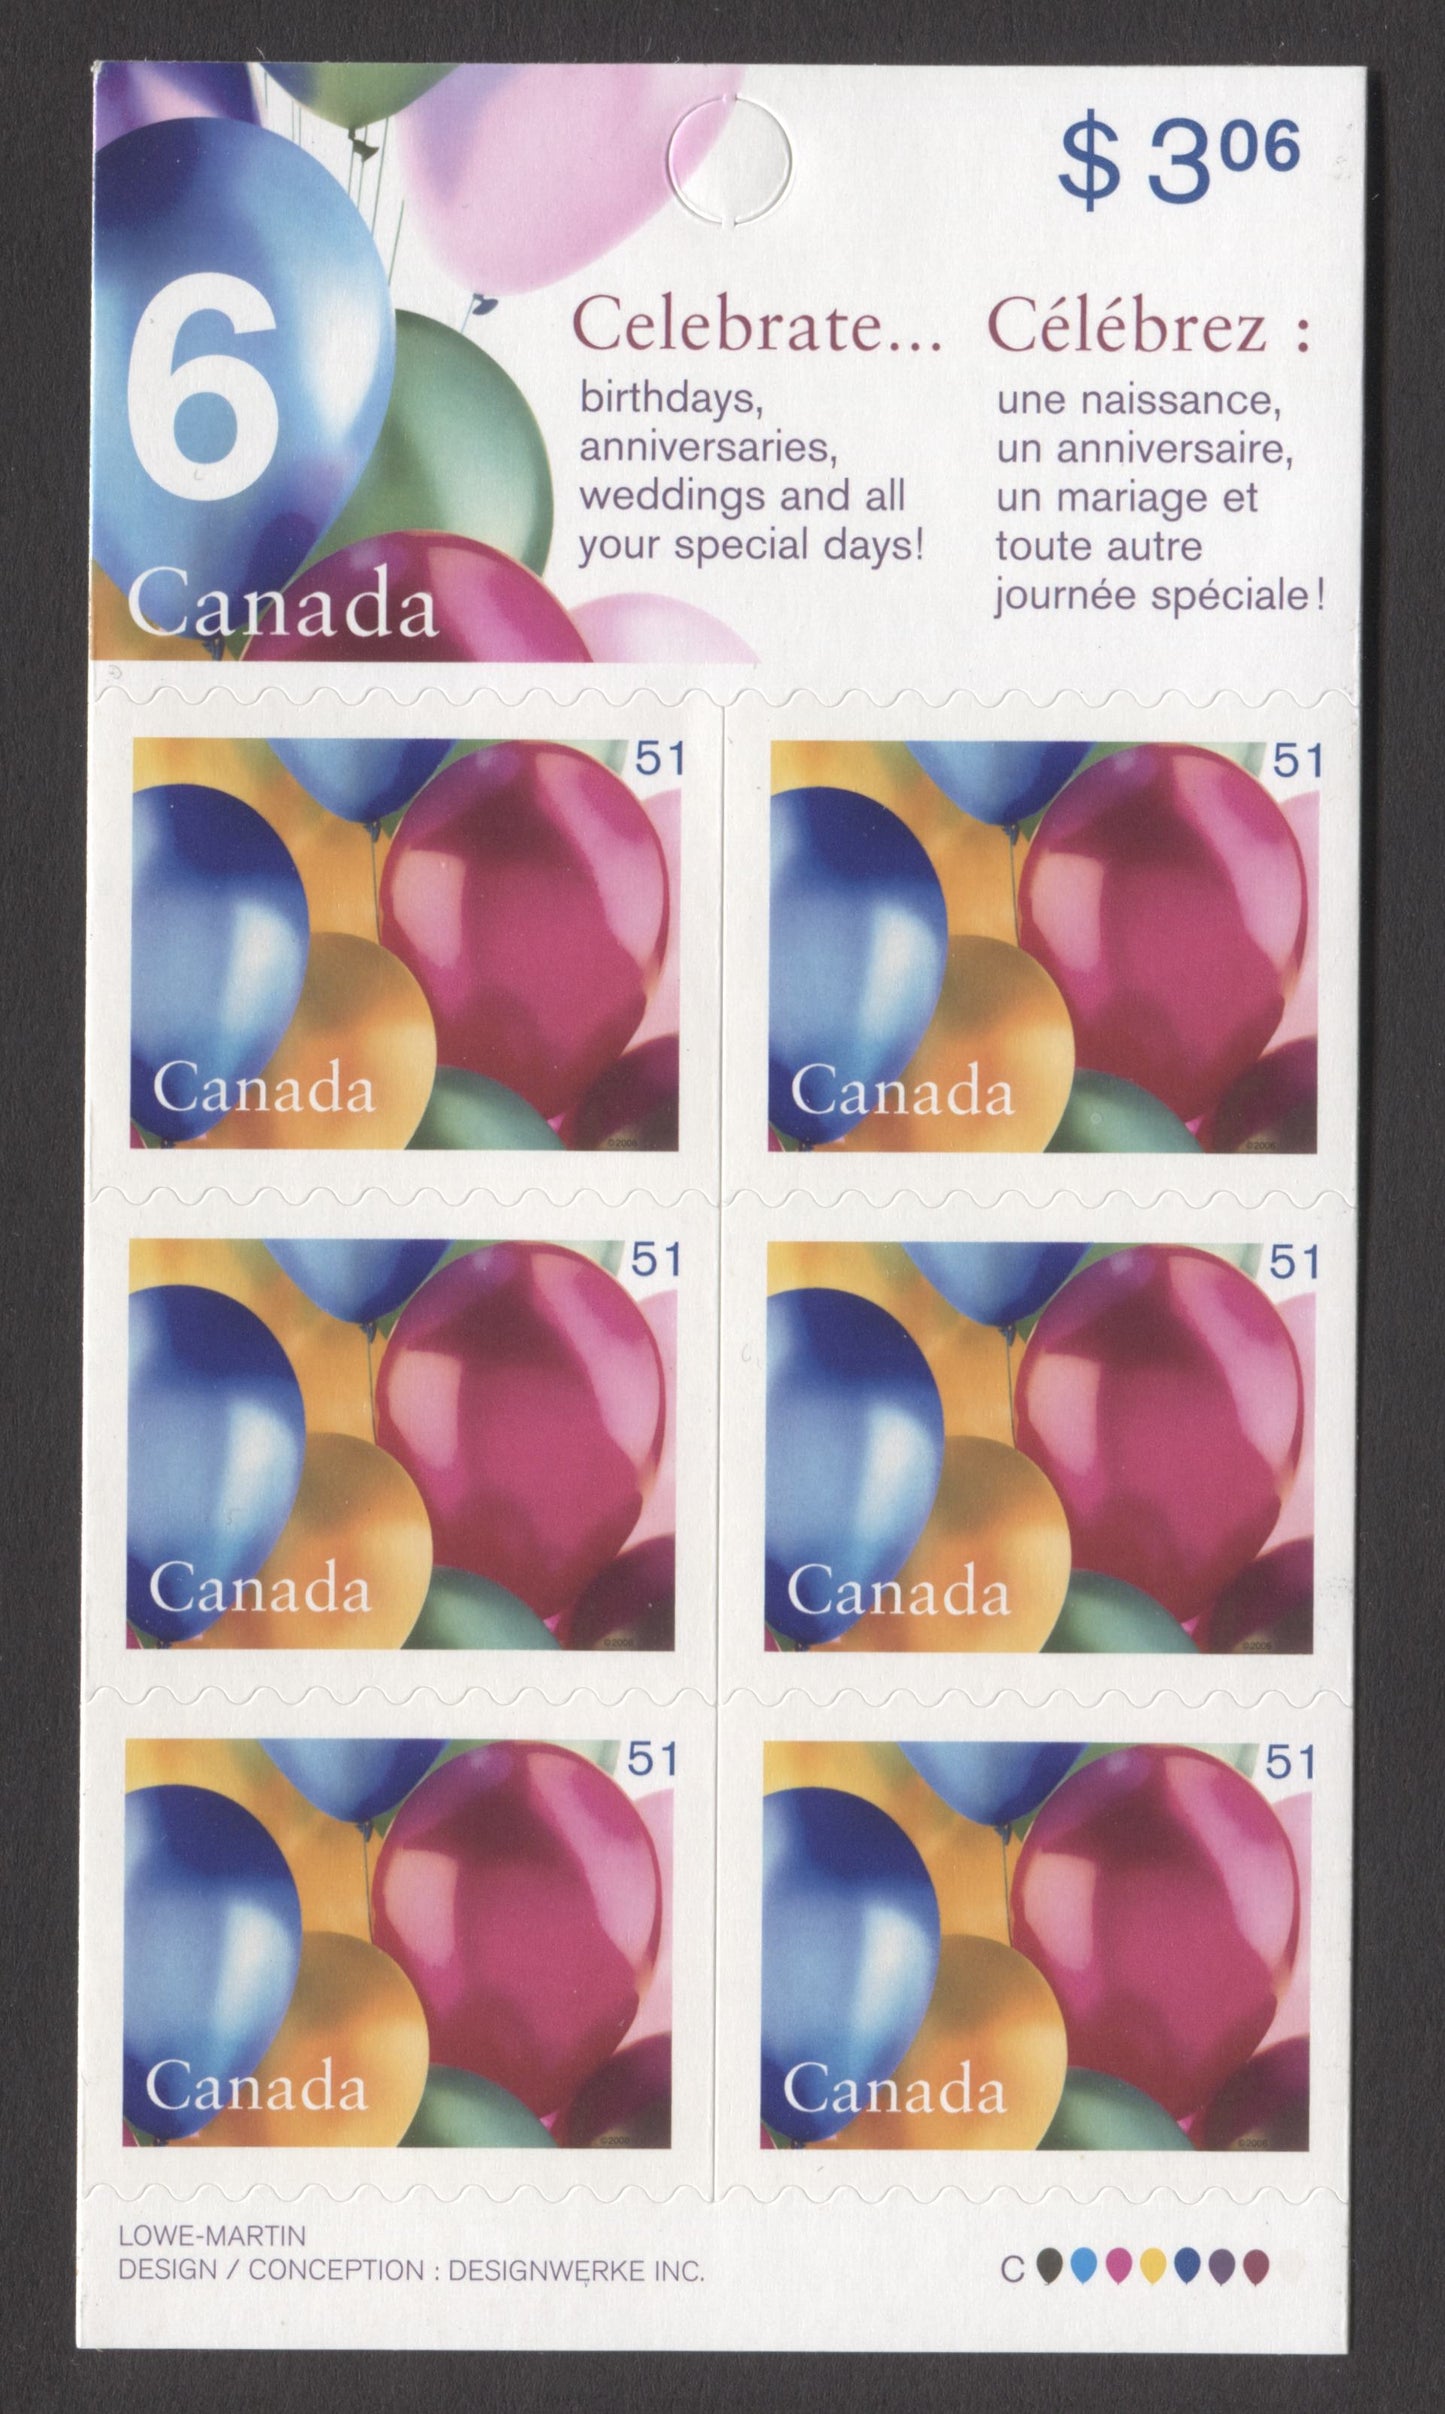 Canada #BK323 2006 Birthdays Issue, Complete $3.06  Booklet, Tullis Russell Coatings Paper, Dead Paper, 4 mm GT-4 Tagging